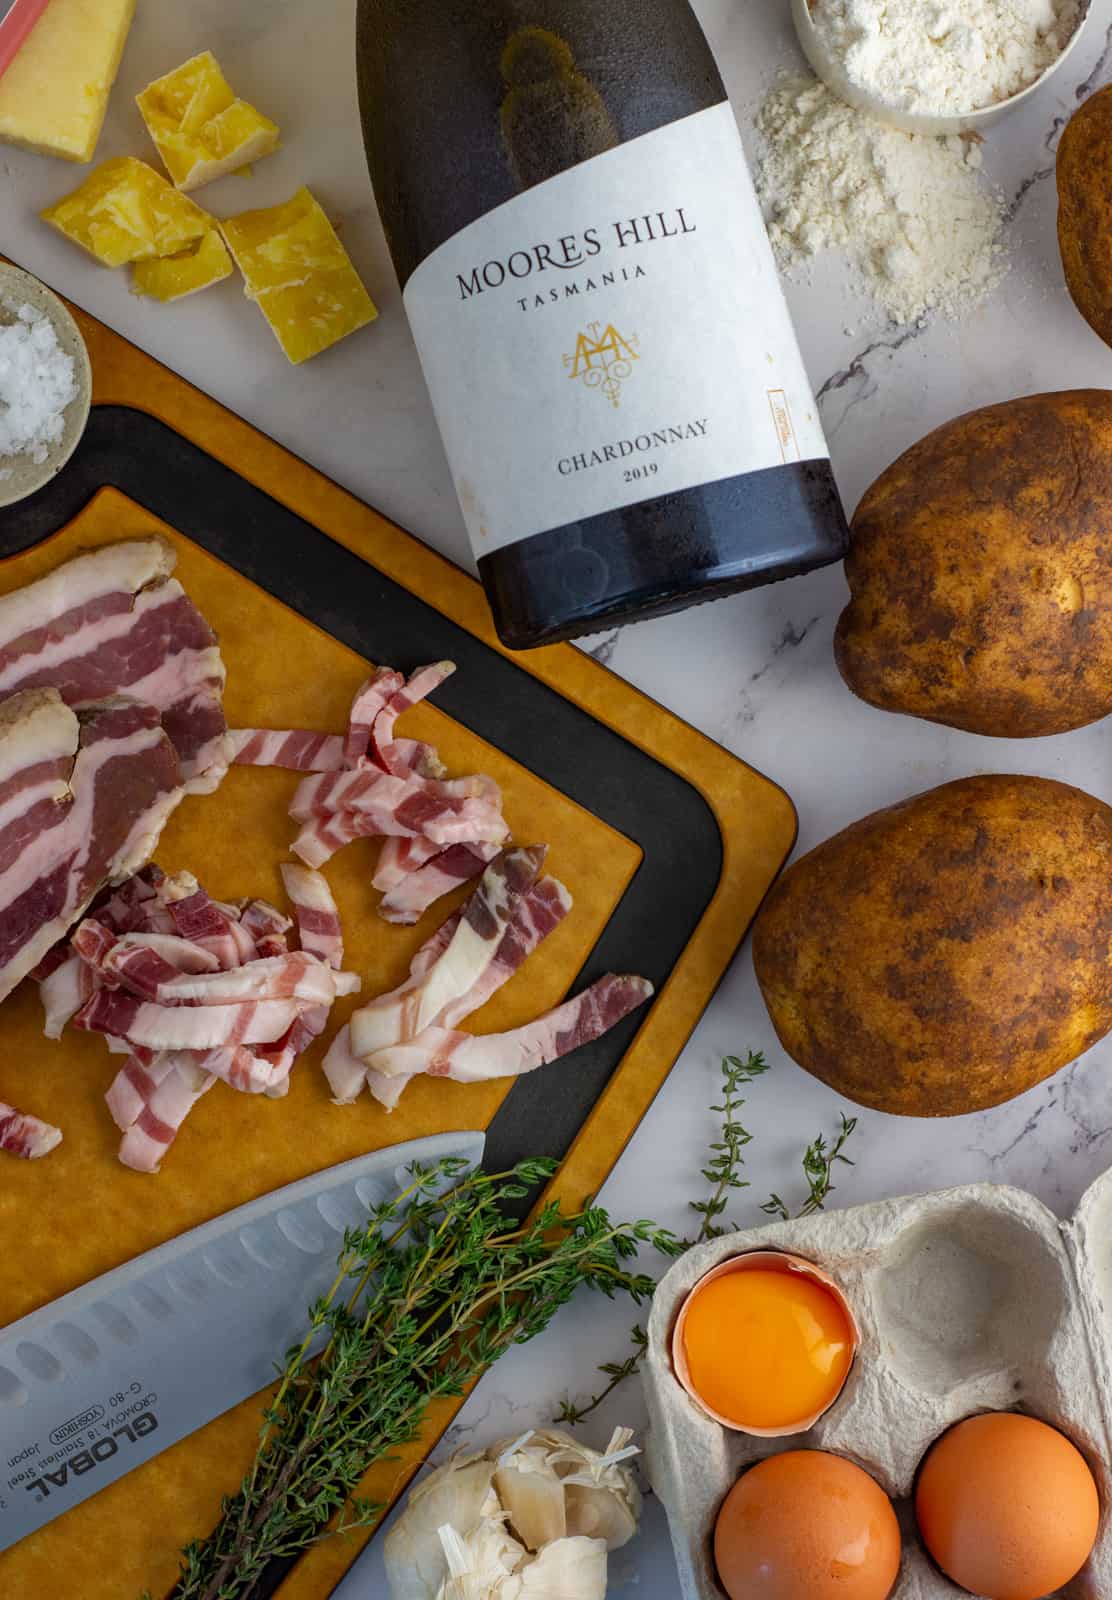 moores hill chardonnay, potatoes, eggs, thyme & pancetta on a chopping board